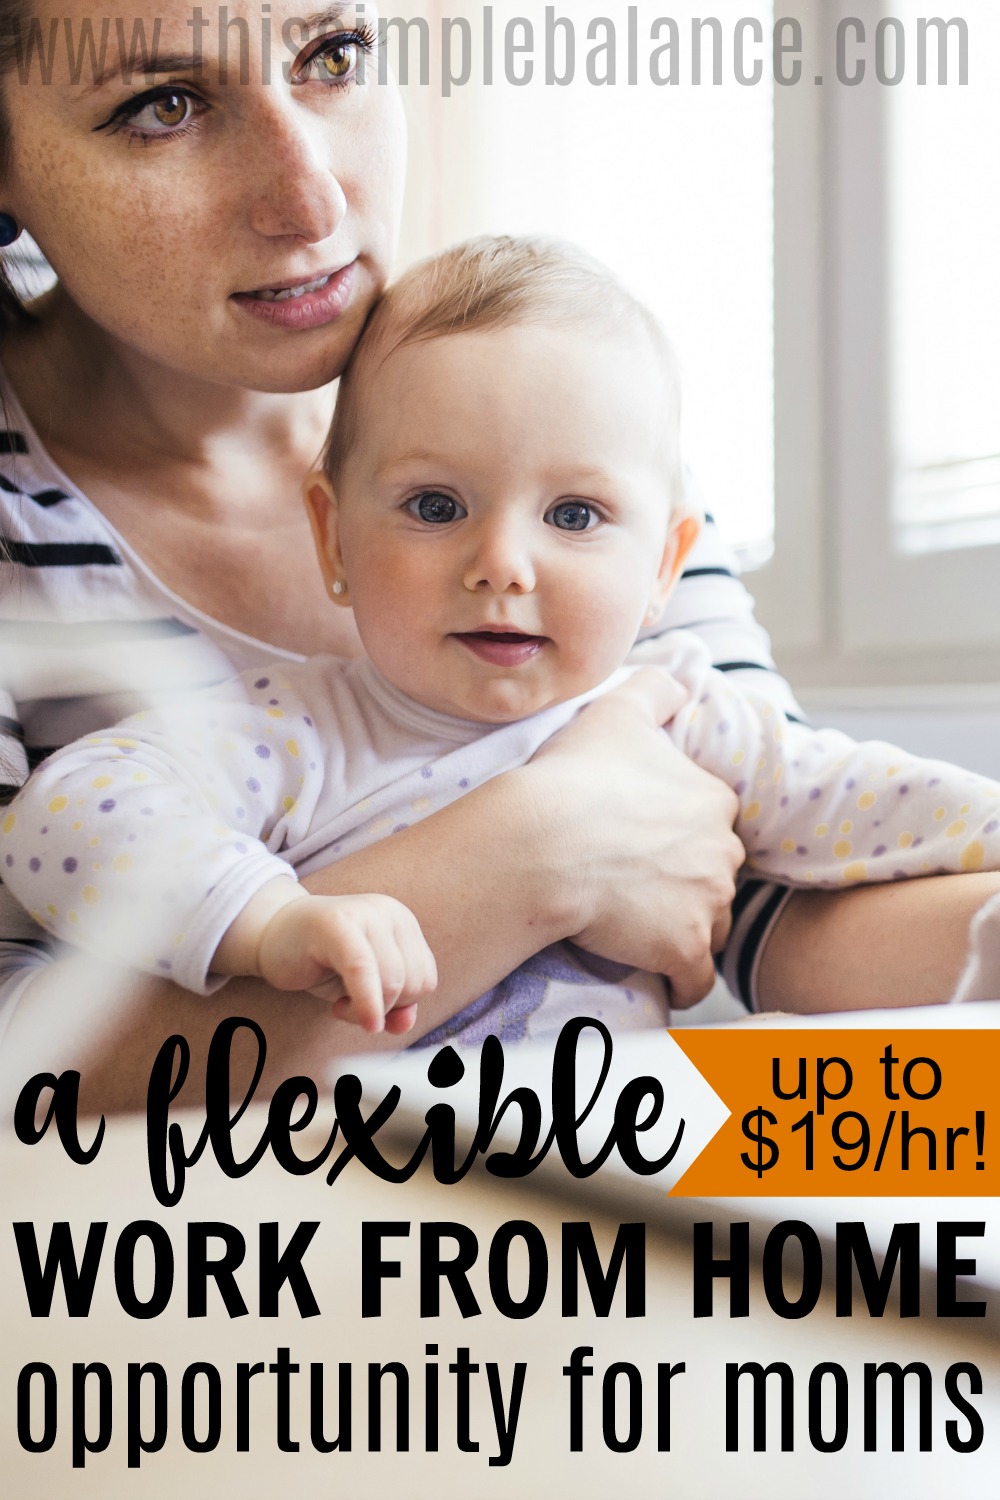 Flexible Work from Home Opportunity for Moms | This Simple BalanceThis